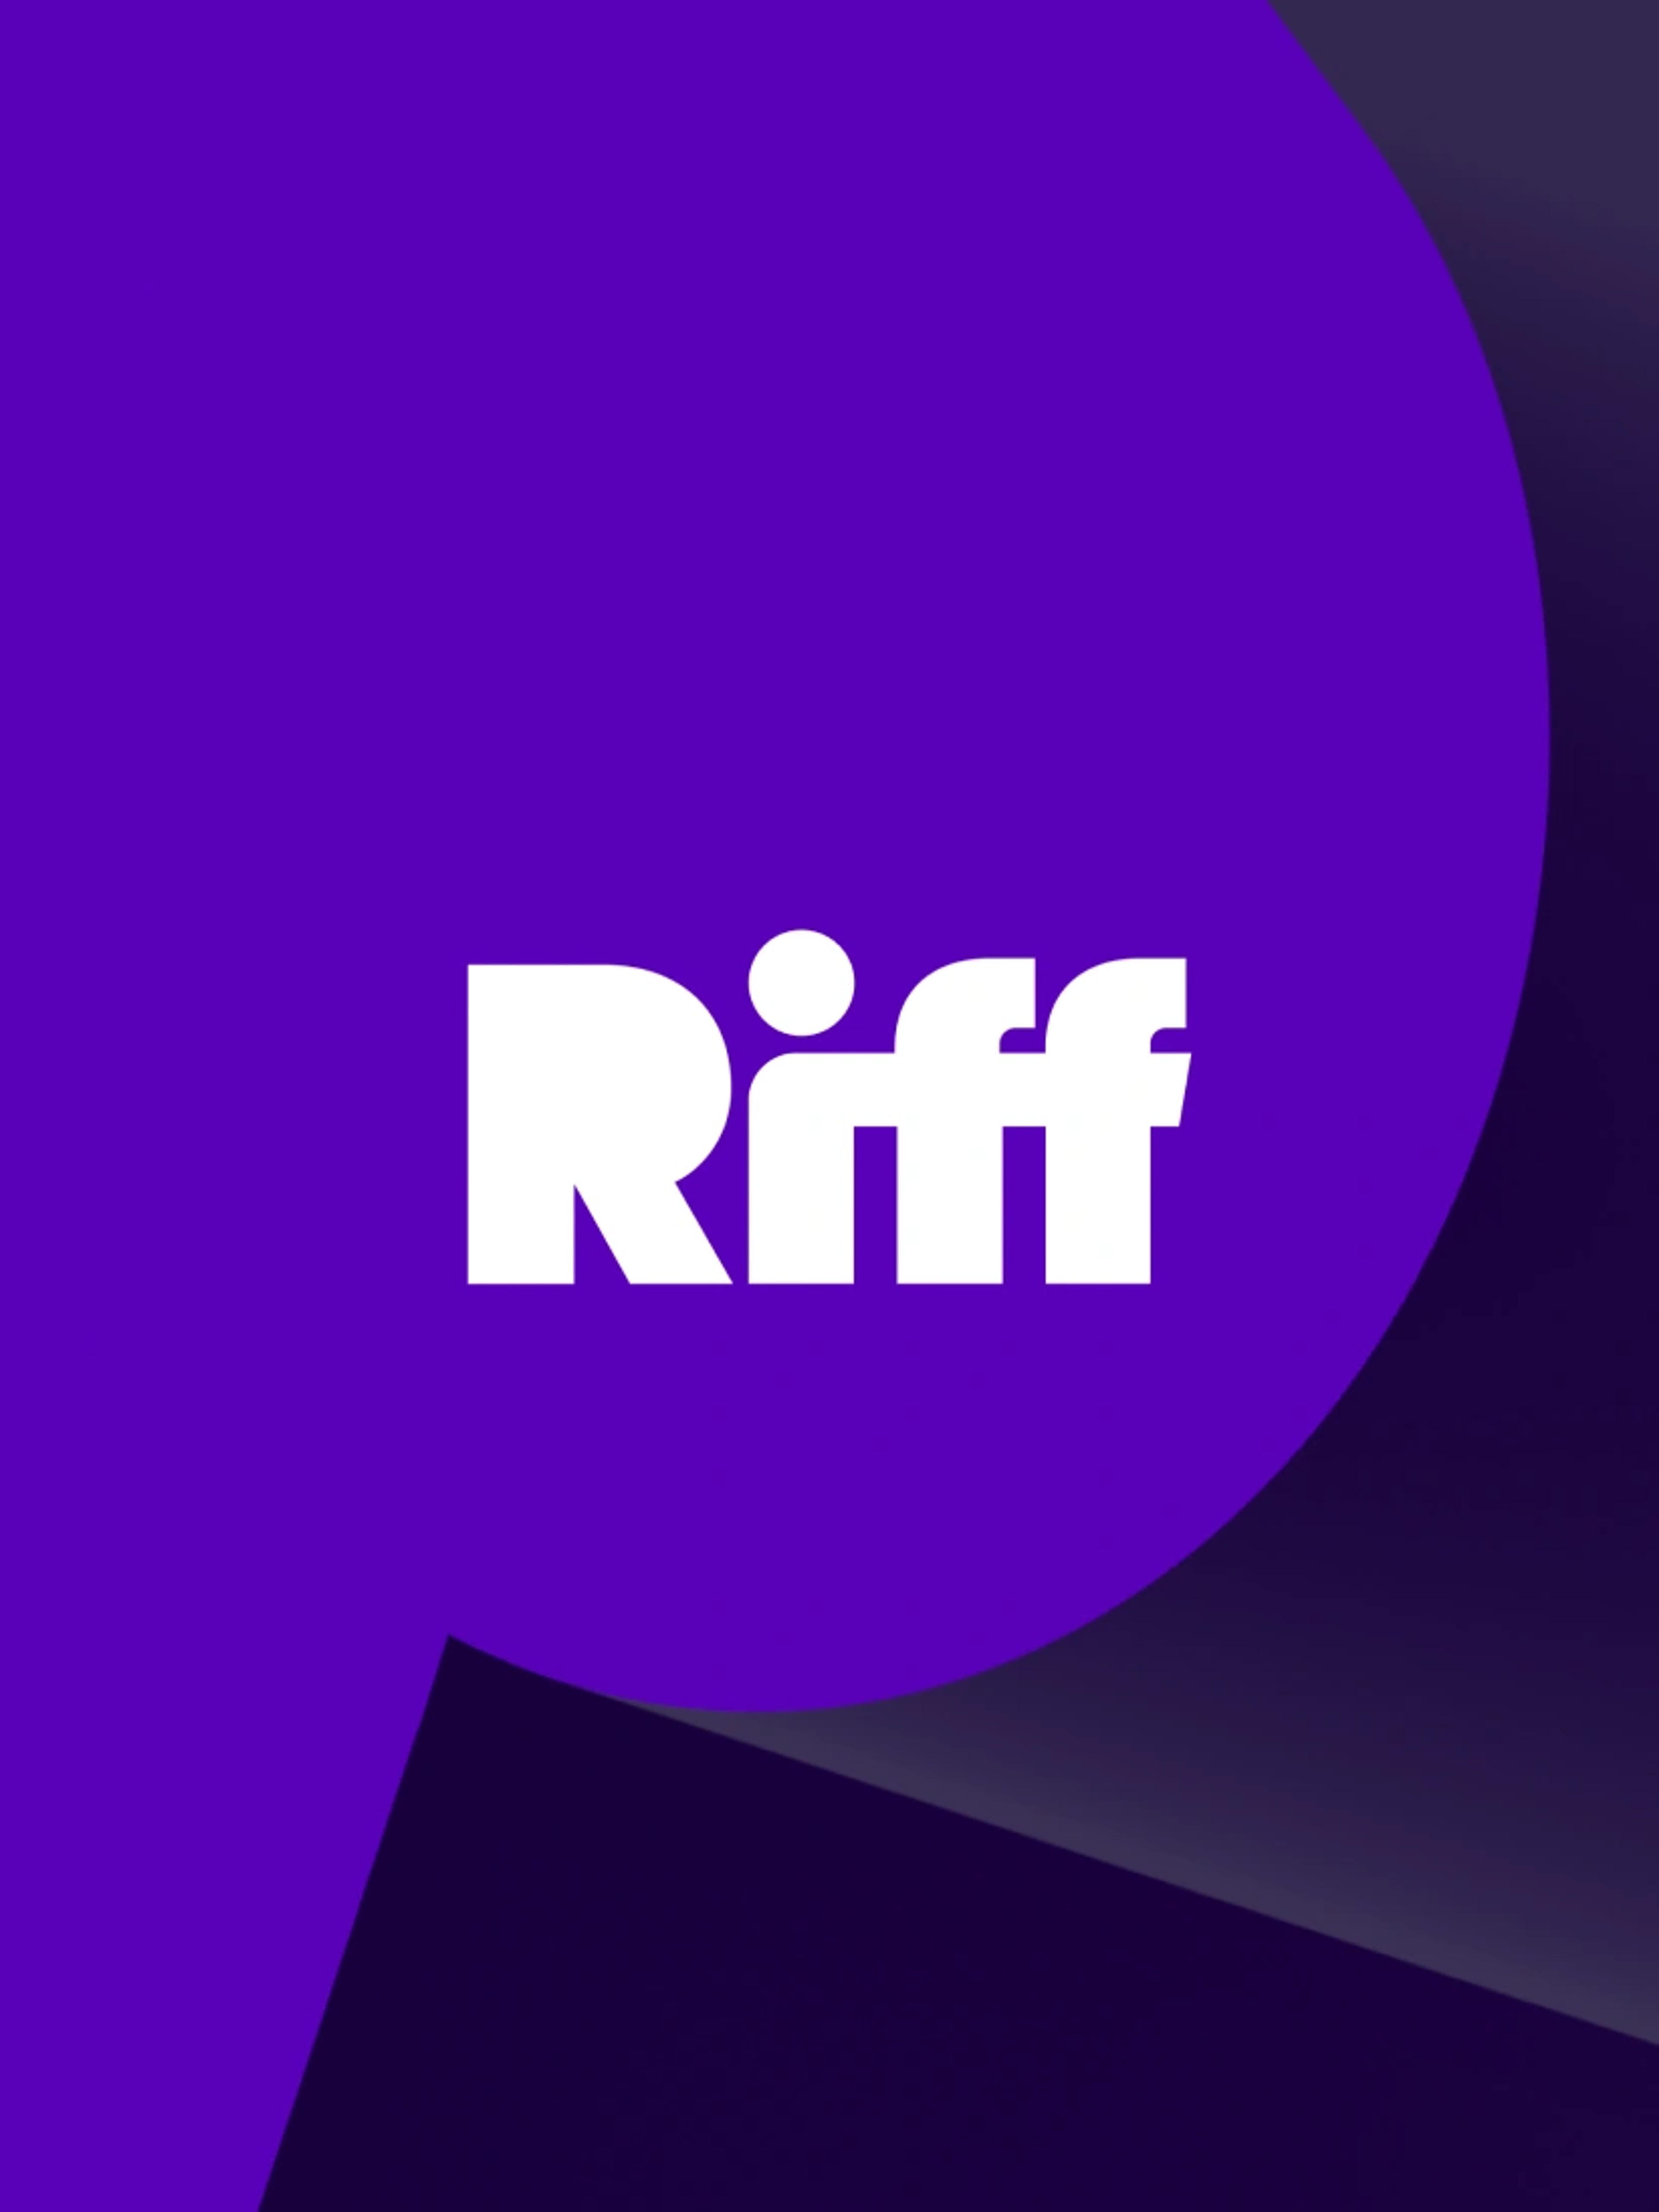 Riff wordmark infront of a 3D version of the Riff logo symbol